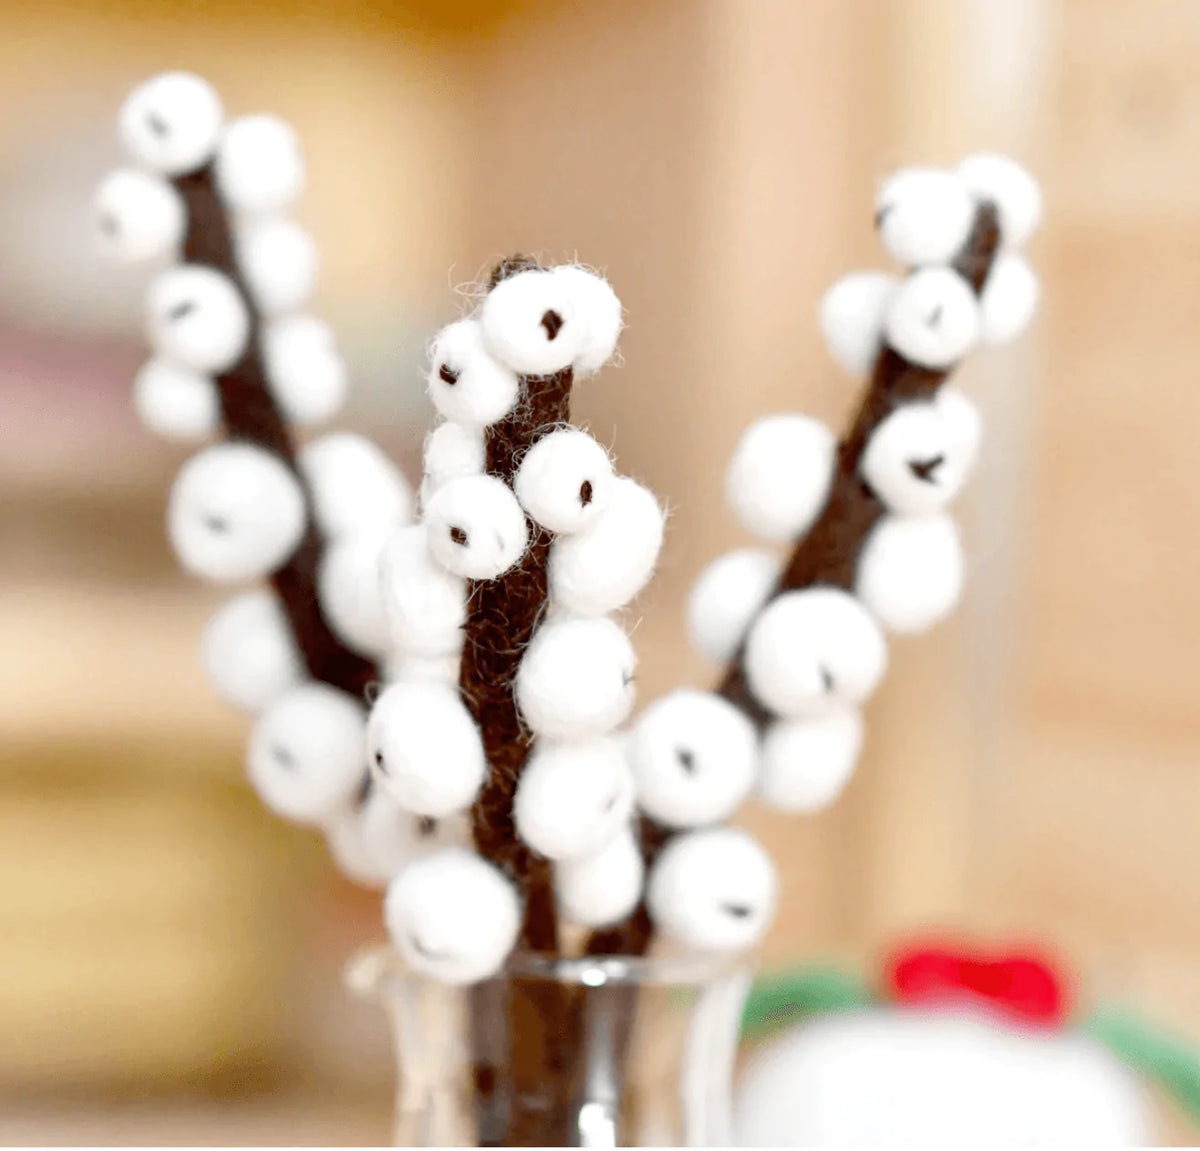 The Curated Parcel - Felt White Winter Berry Stems (Set of 3) 